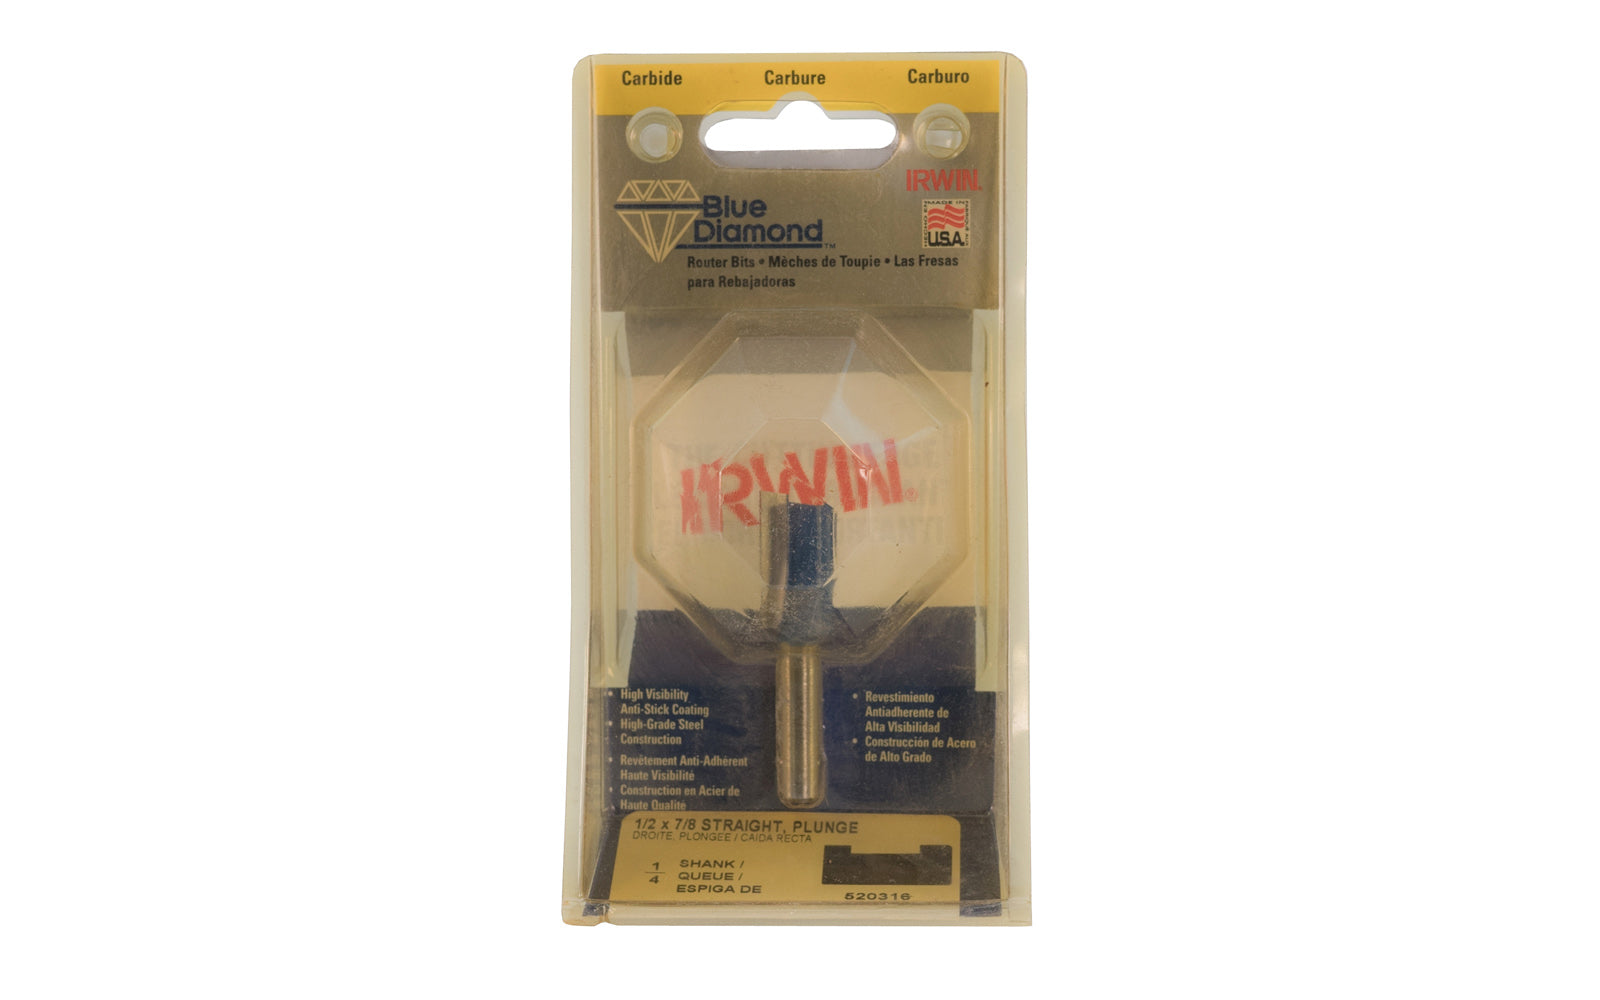 Irwin Carbide 1/2" x 7/8" Straight Plunge Router Bit - Made in USA. High grade Steel construction Router Bit. 2" overall length. 1/4" shank. Irwin Blue Diamond Model No. 520316. Made in USA.